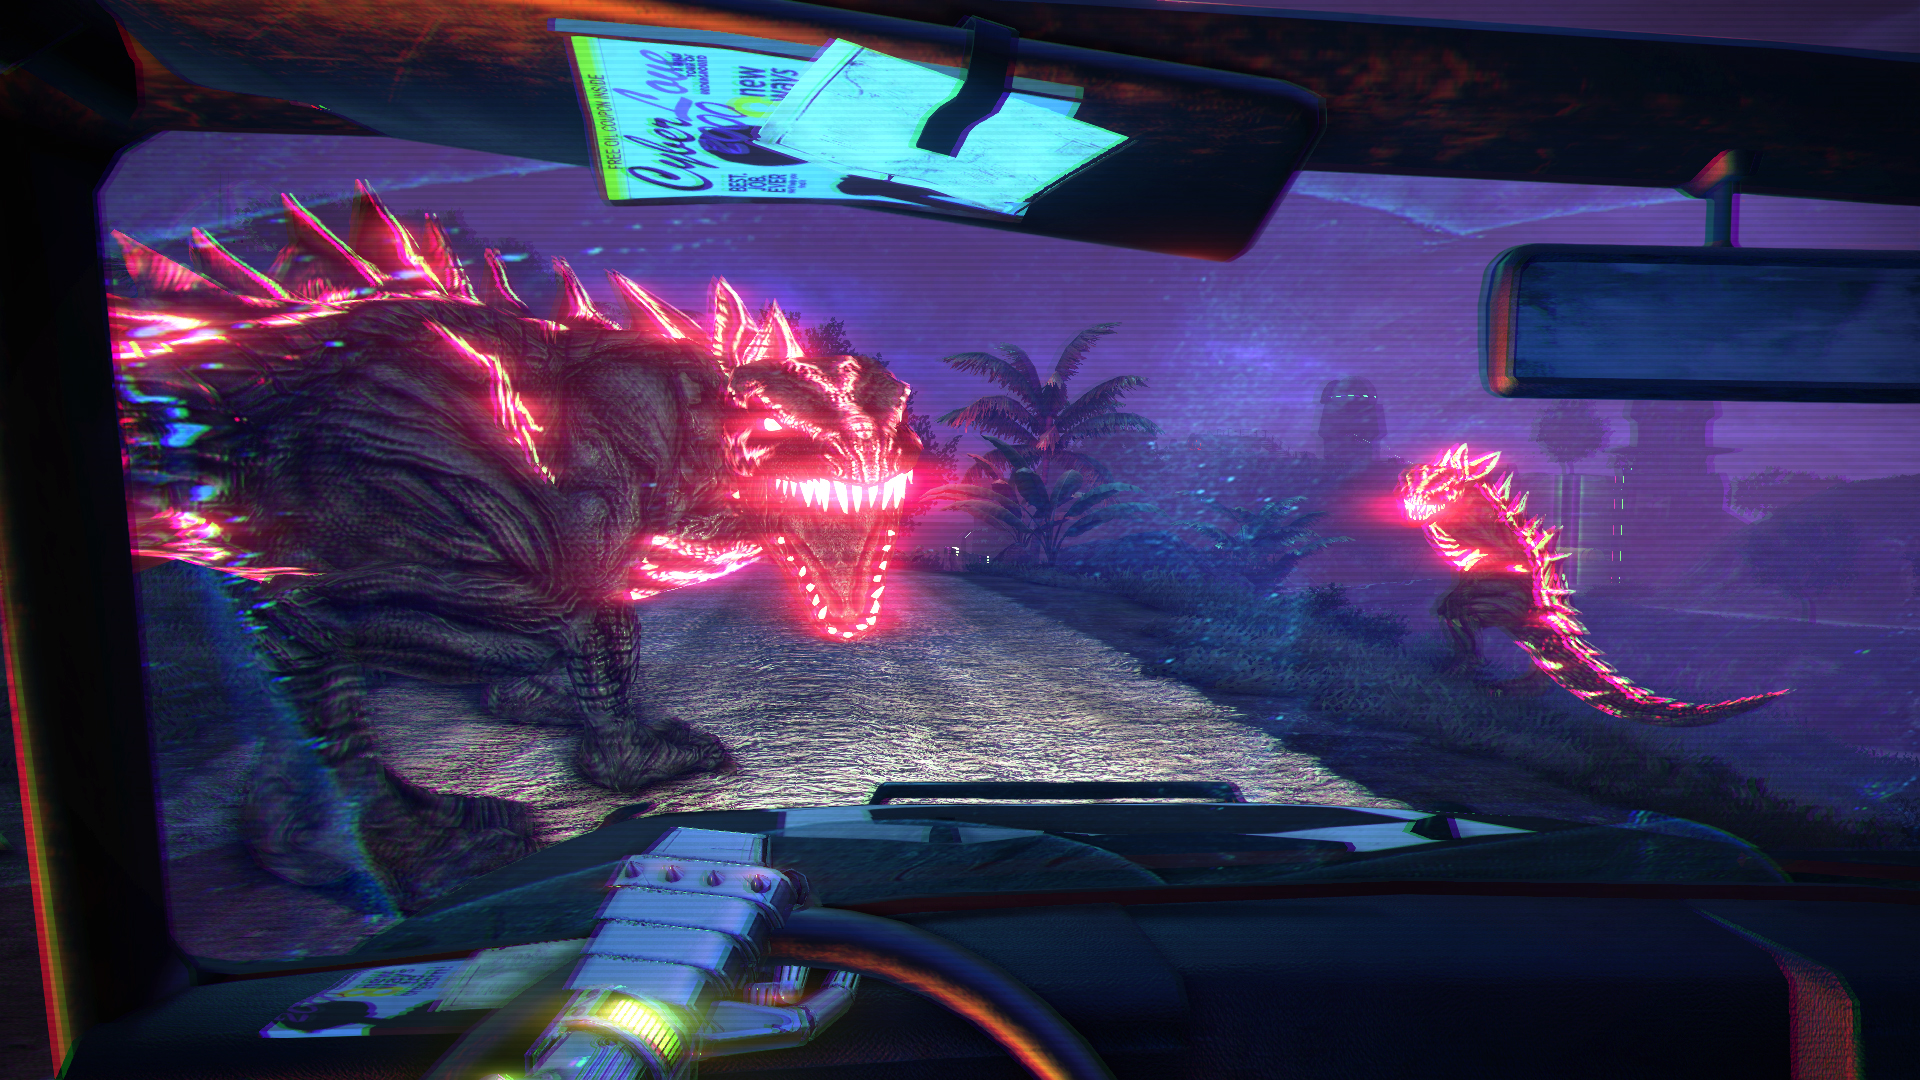 far cry 3 blood dragon classic edition download